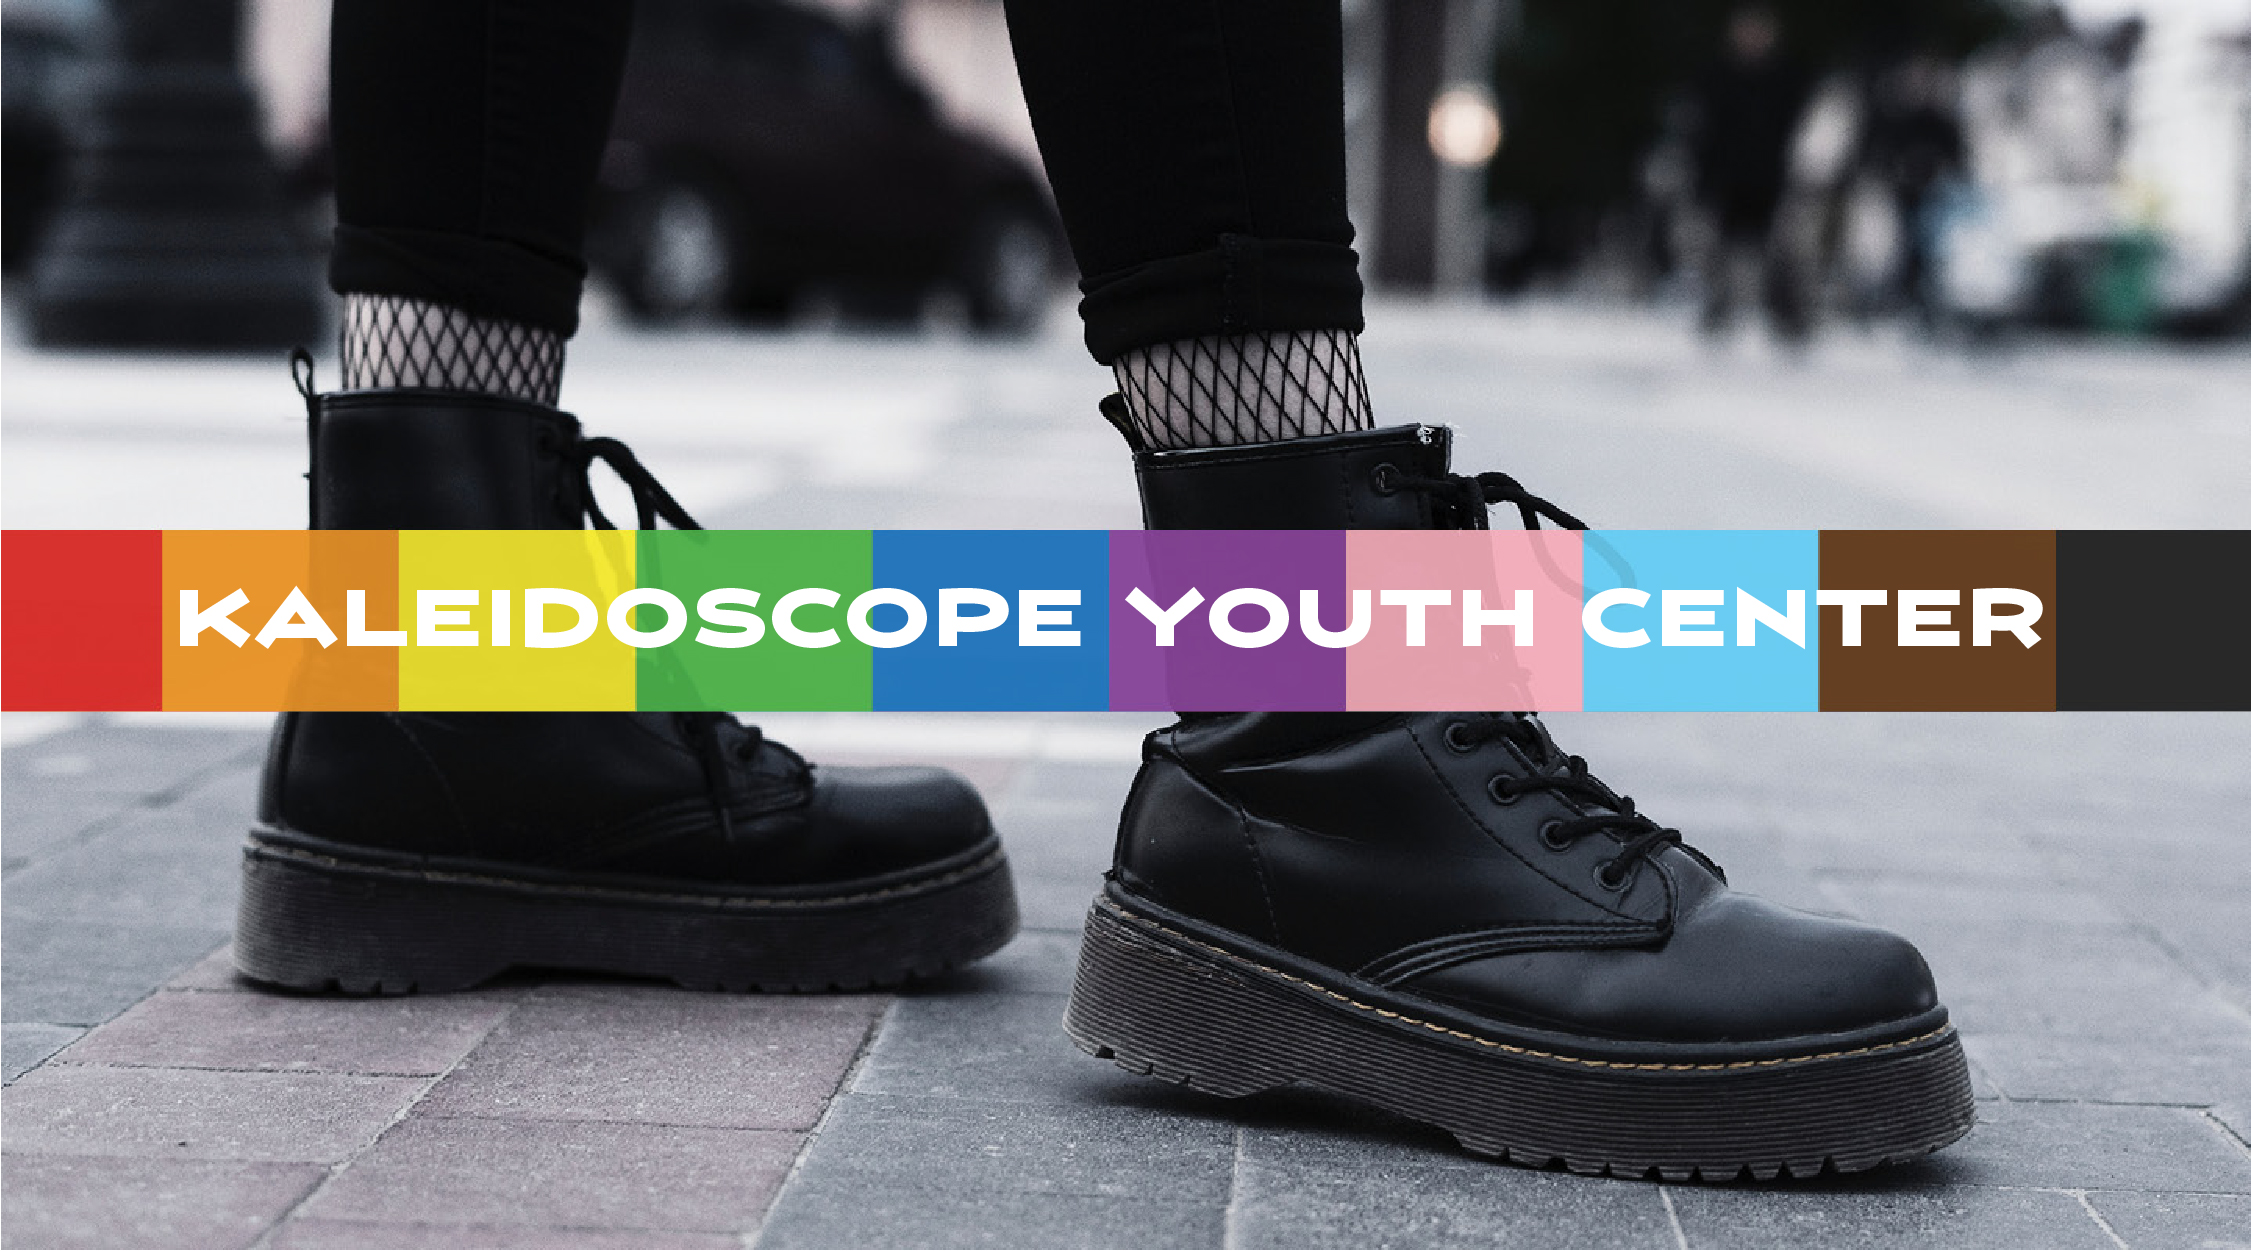 Close up image of boots someone is wearing while standing on a brick sidewalk. Text on image: Kaleidoscope Youth Center